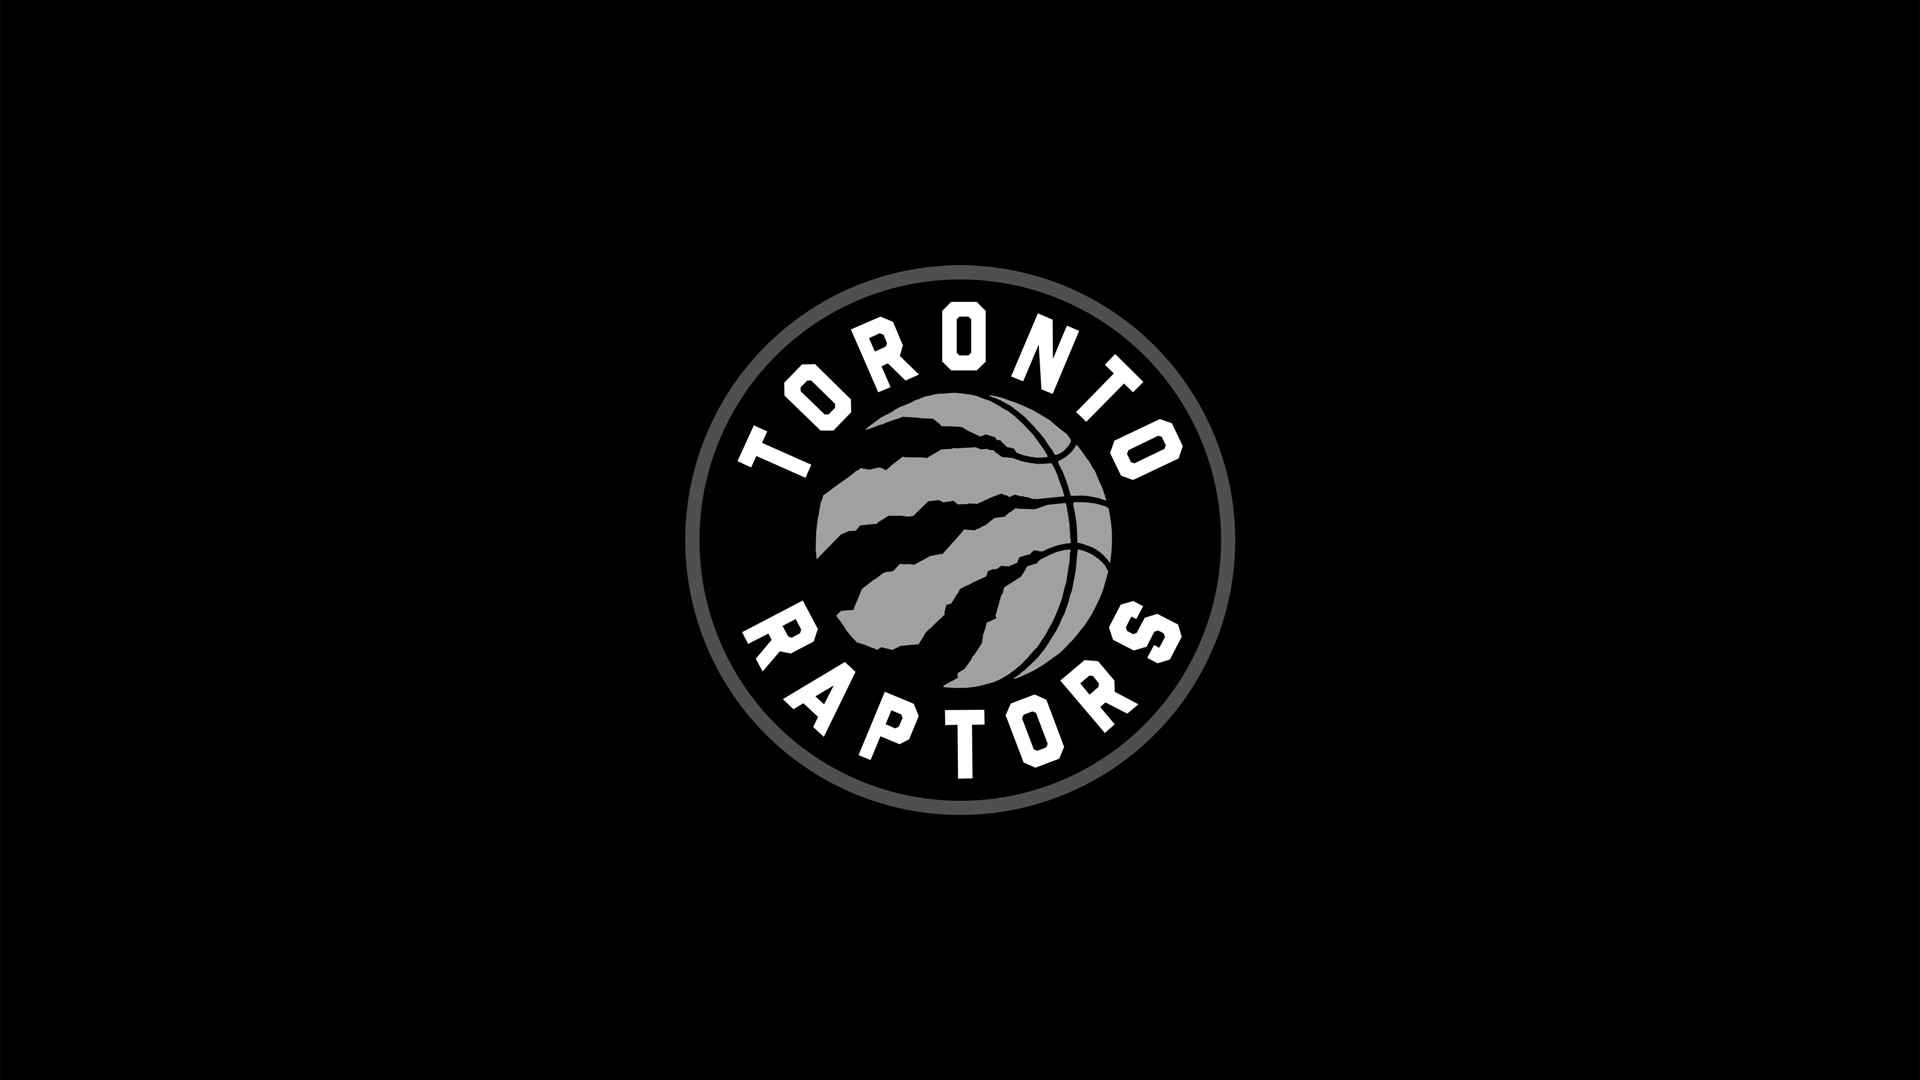 Raptors Basketball Desktop Wallpapers with image dimensions 1920x1080 pixel. You can make this wallpaper for your Desktop Computer Backgrounds, Windows or Mac Screensavers, iPhone Lock screen, Tablet or Android and another Mobile Phone device